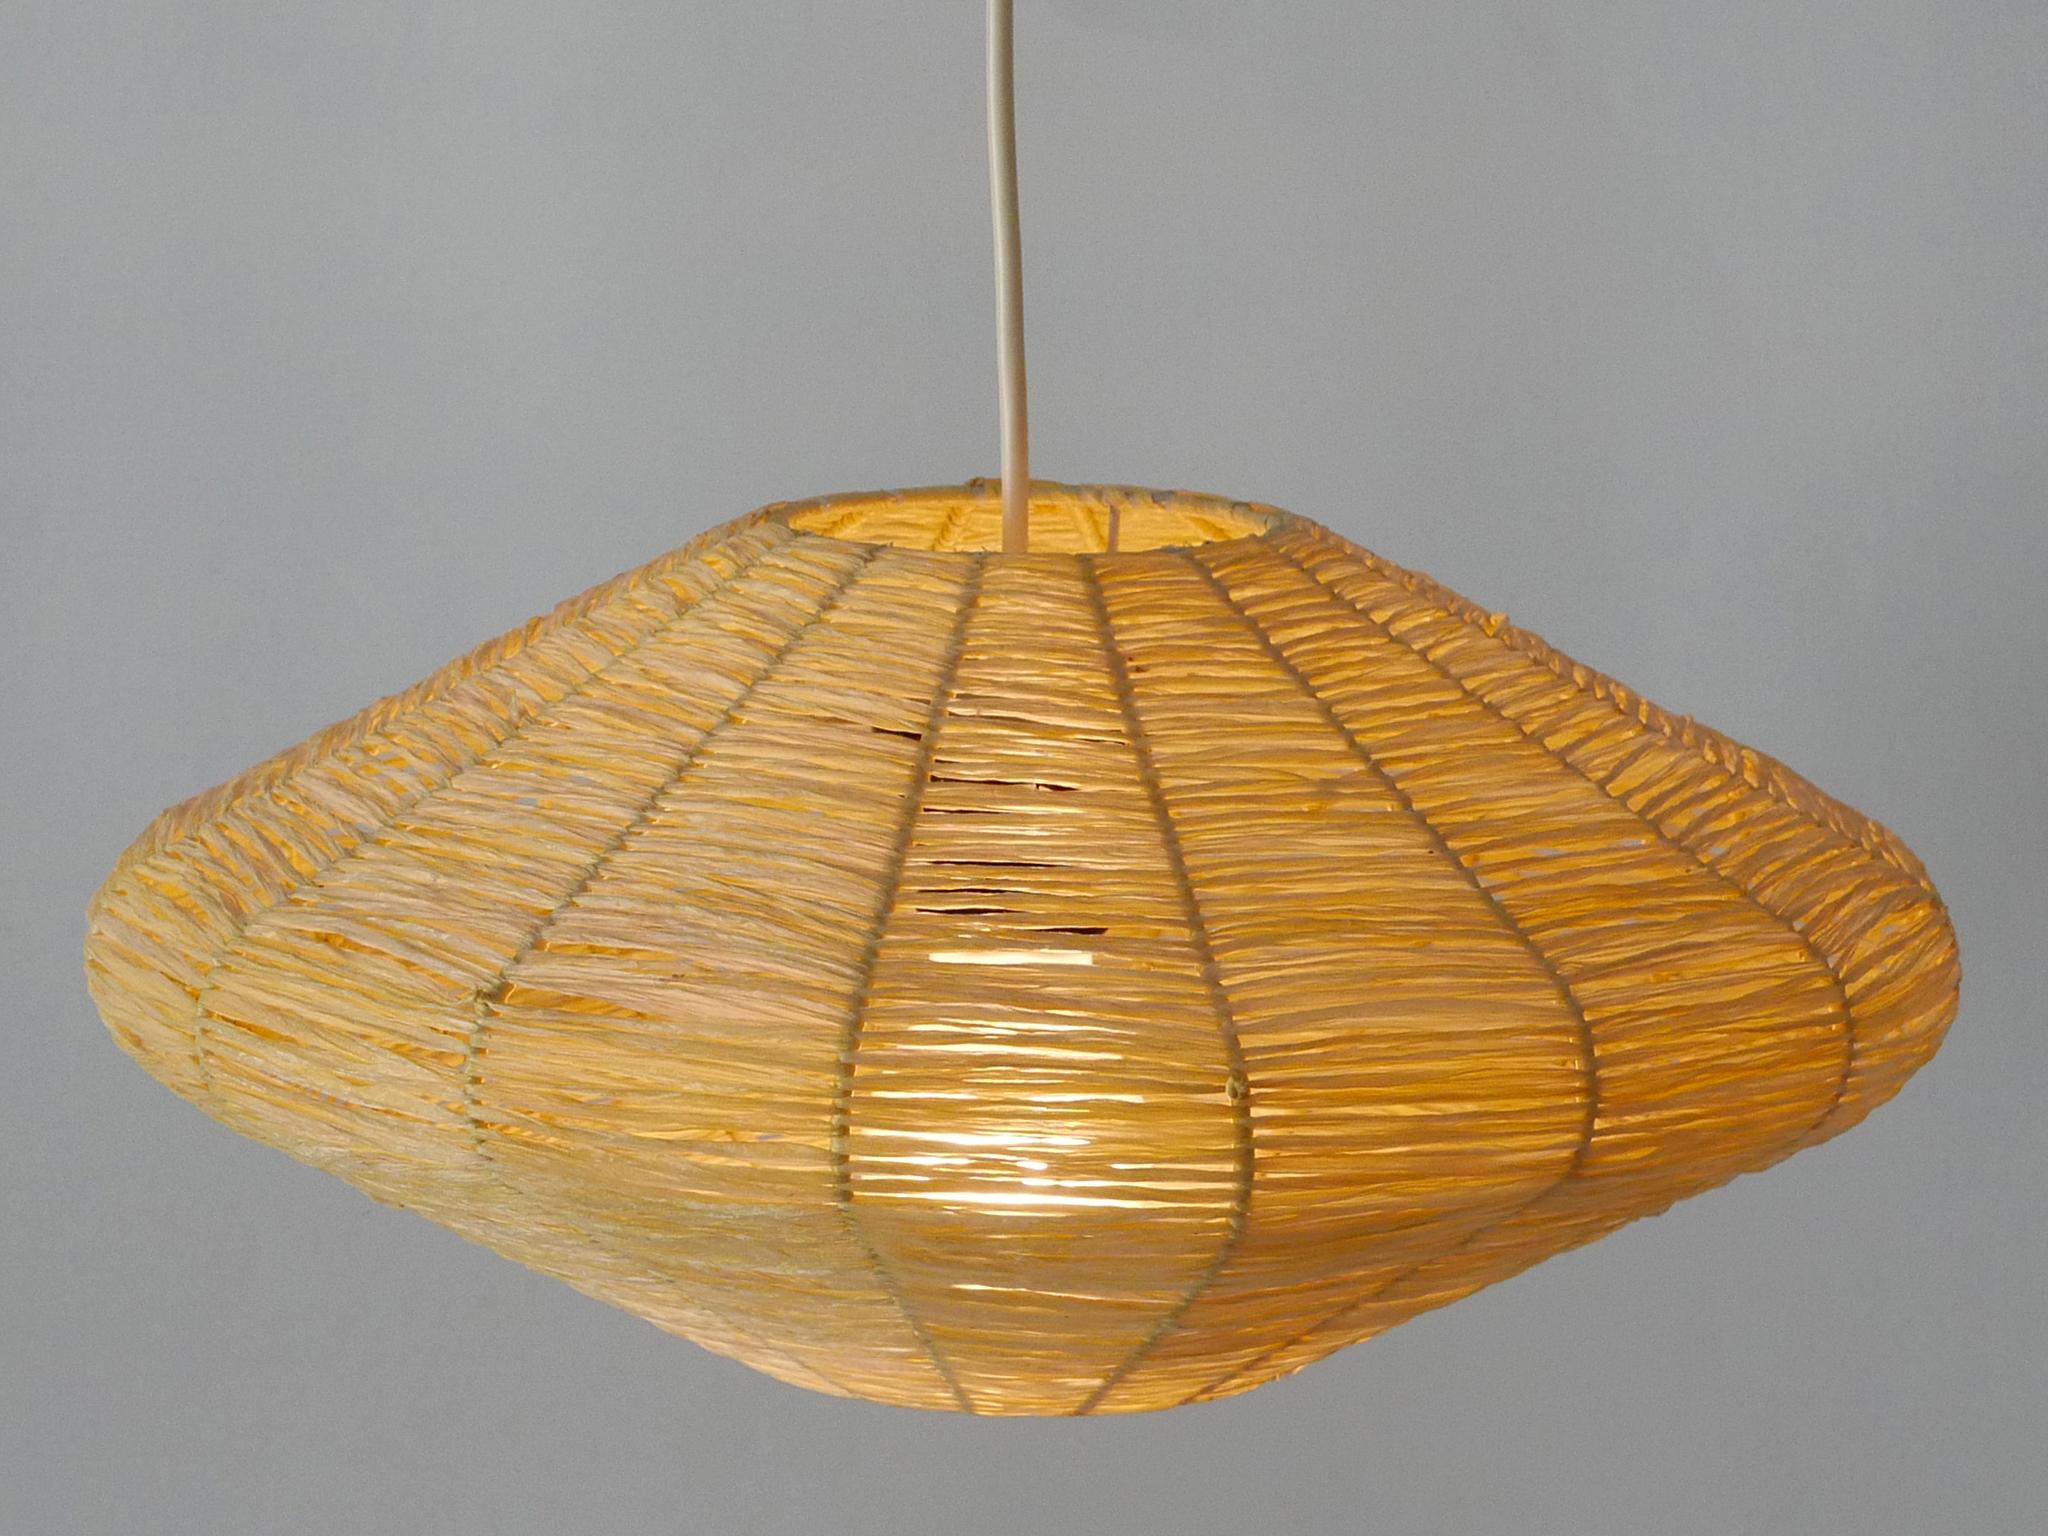 Rare, elegant and highly decorative Mid-Century Modern pendant lamp / hanging light. Manufactured in Germany, 1970s.

Two identical pieces available!

Executed in raffia bast and metal, the pendant lamp comes with 1 x E27 / E26 Edison screw fit bulb